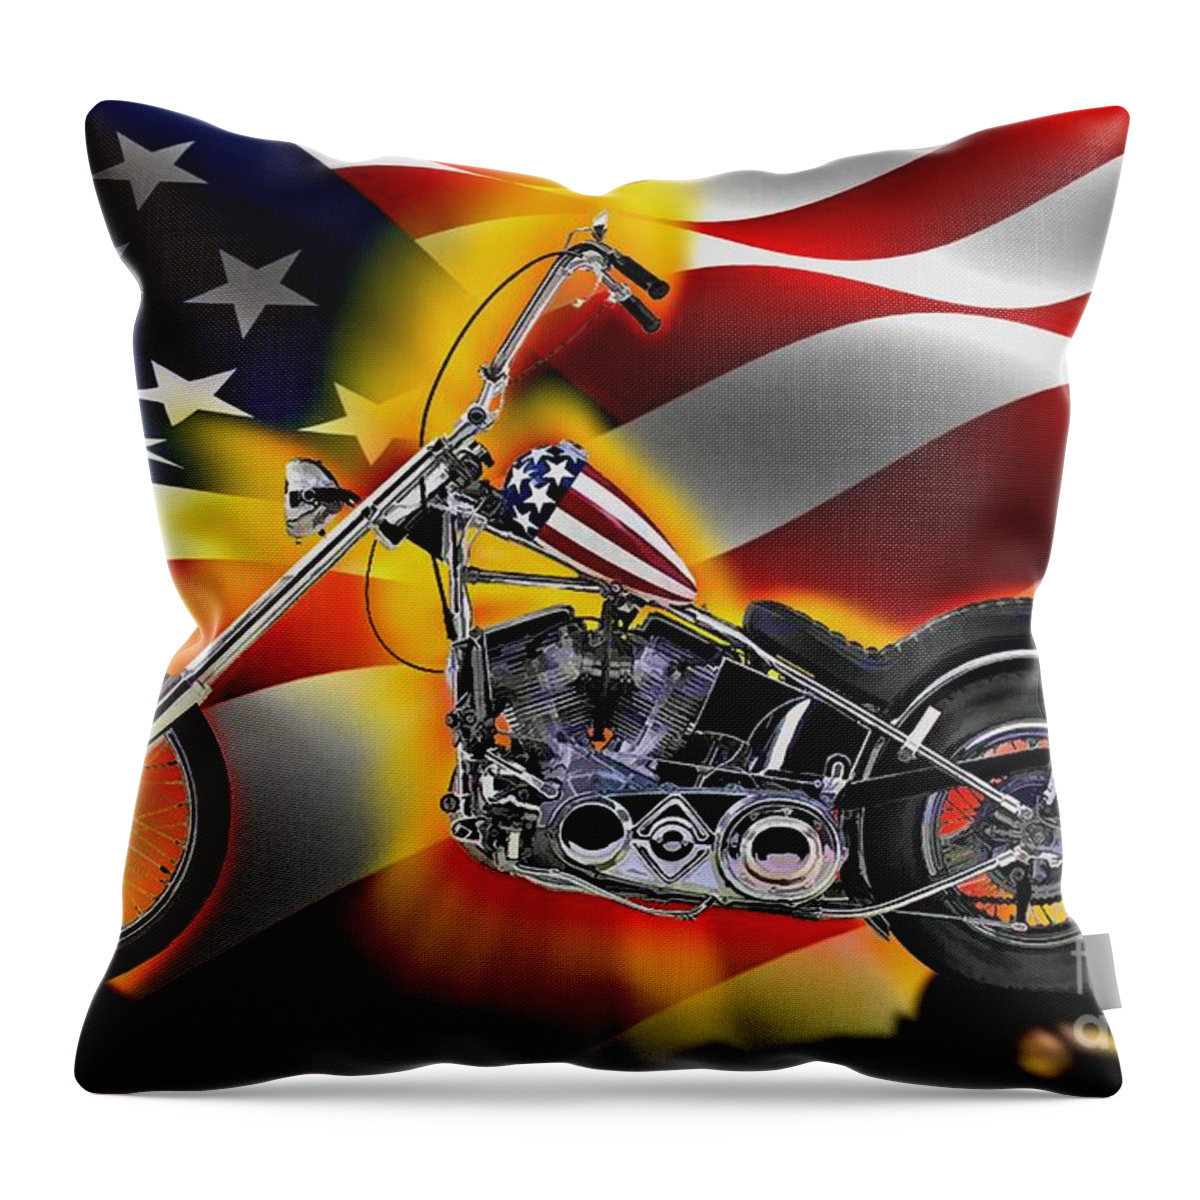 Chopper Throw Pillow featuring the digital art Easy Rider by Tommy Anderson